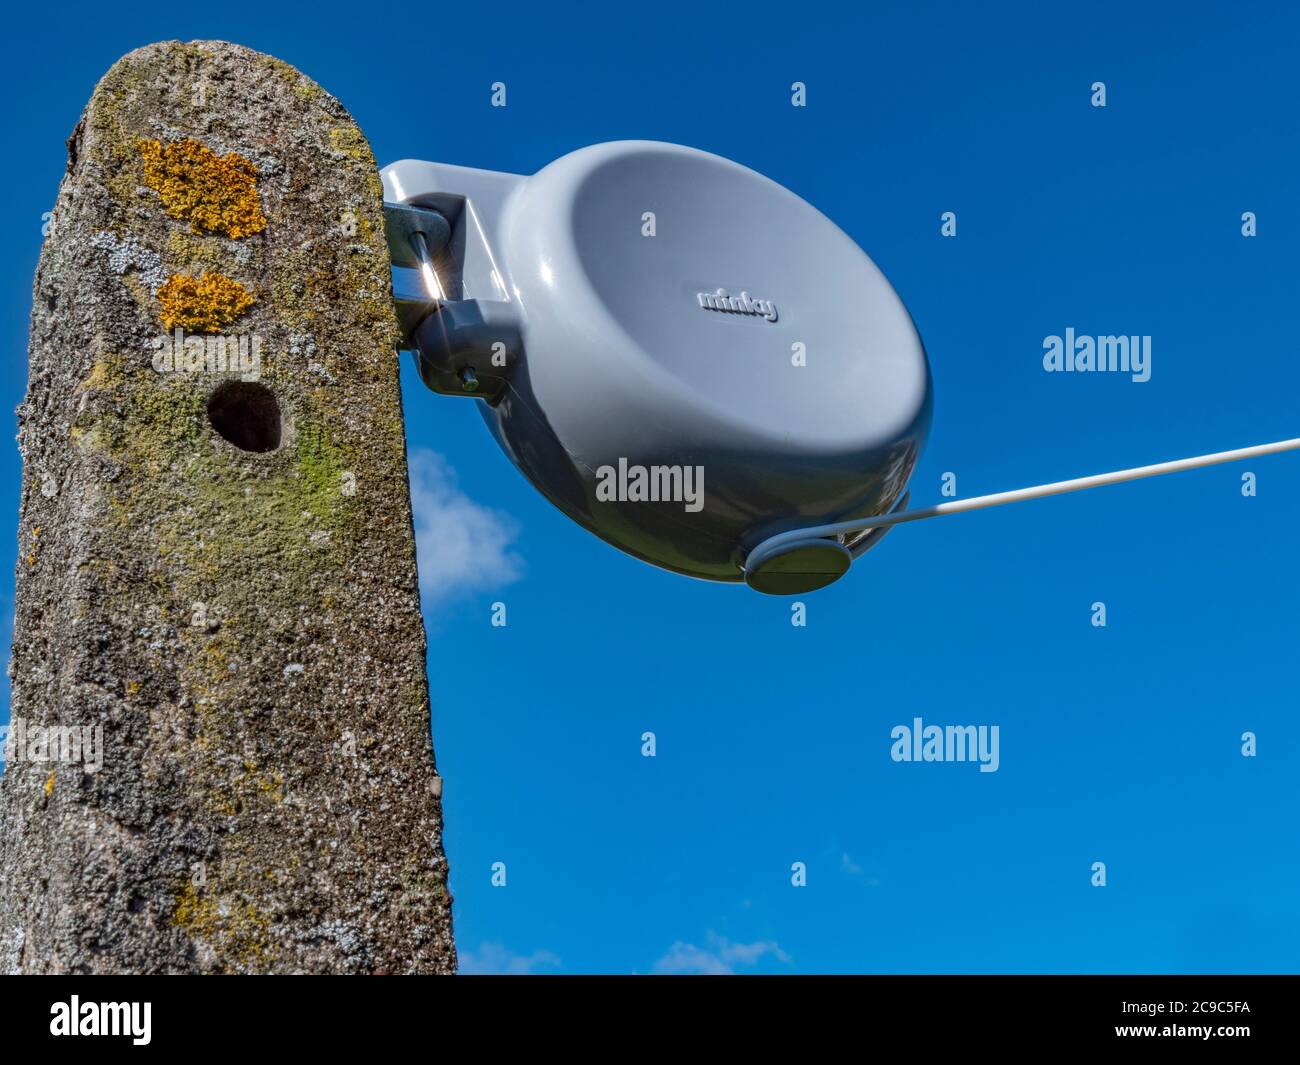 Minky branded retractable washing line reel, attached to a concrete post, with the line tightly pulled out and secured around the reel base. Stock Photo